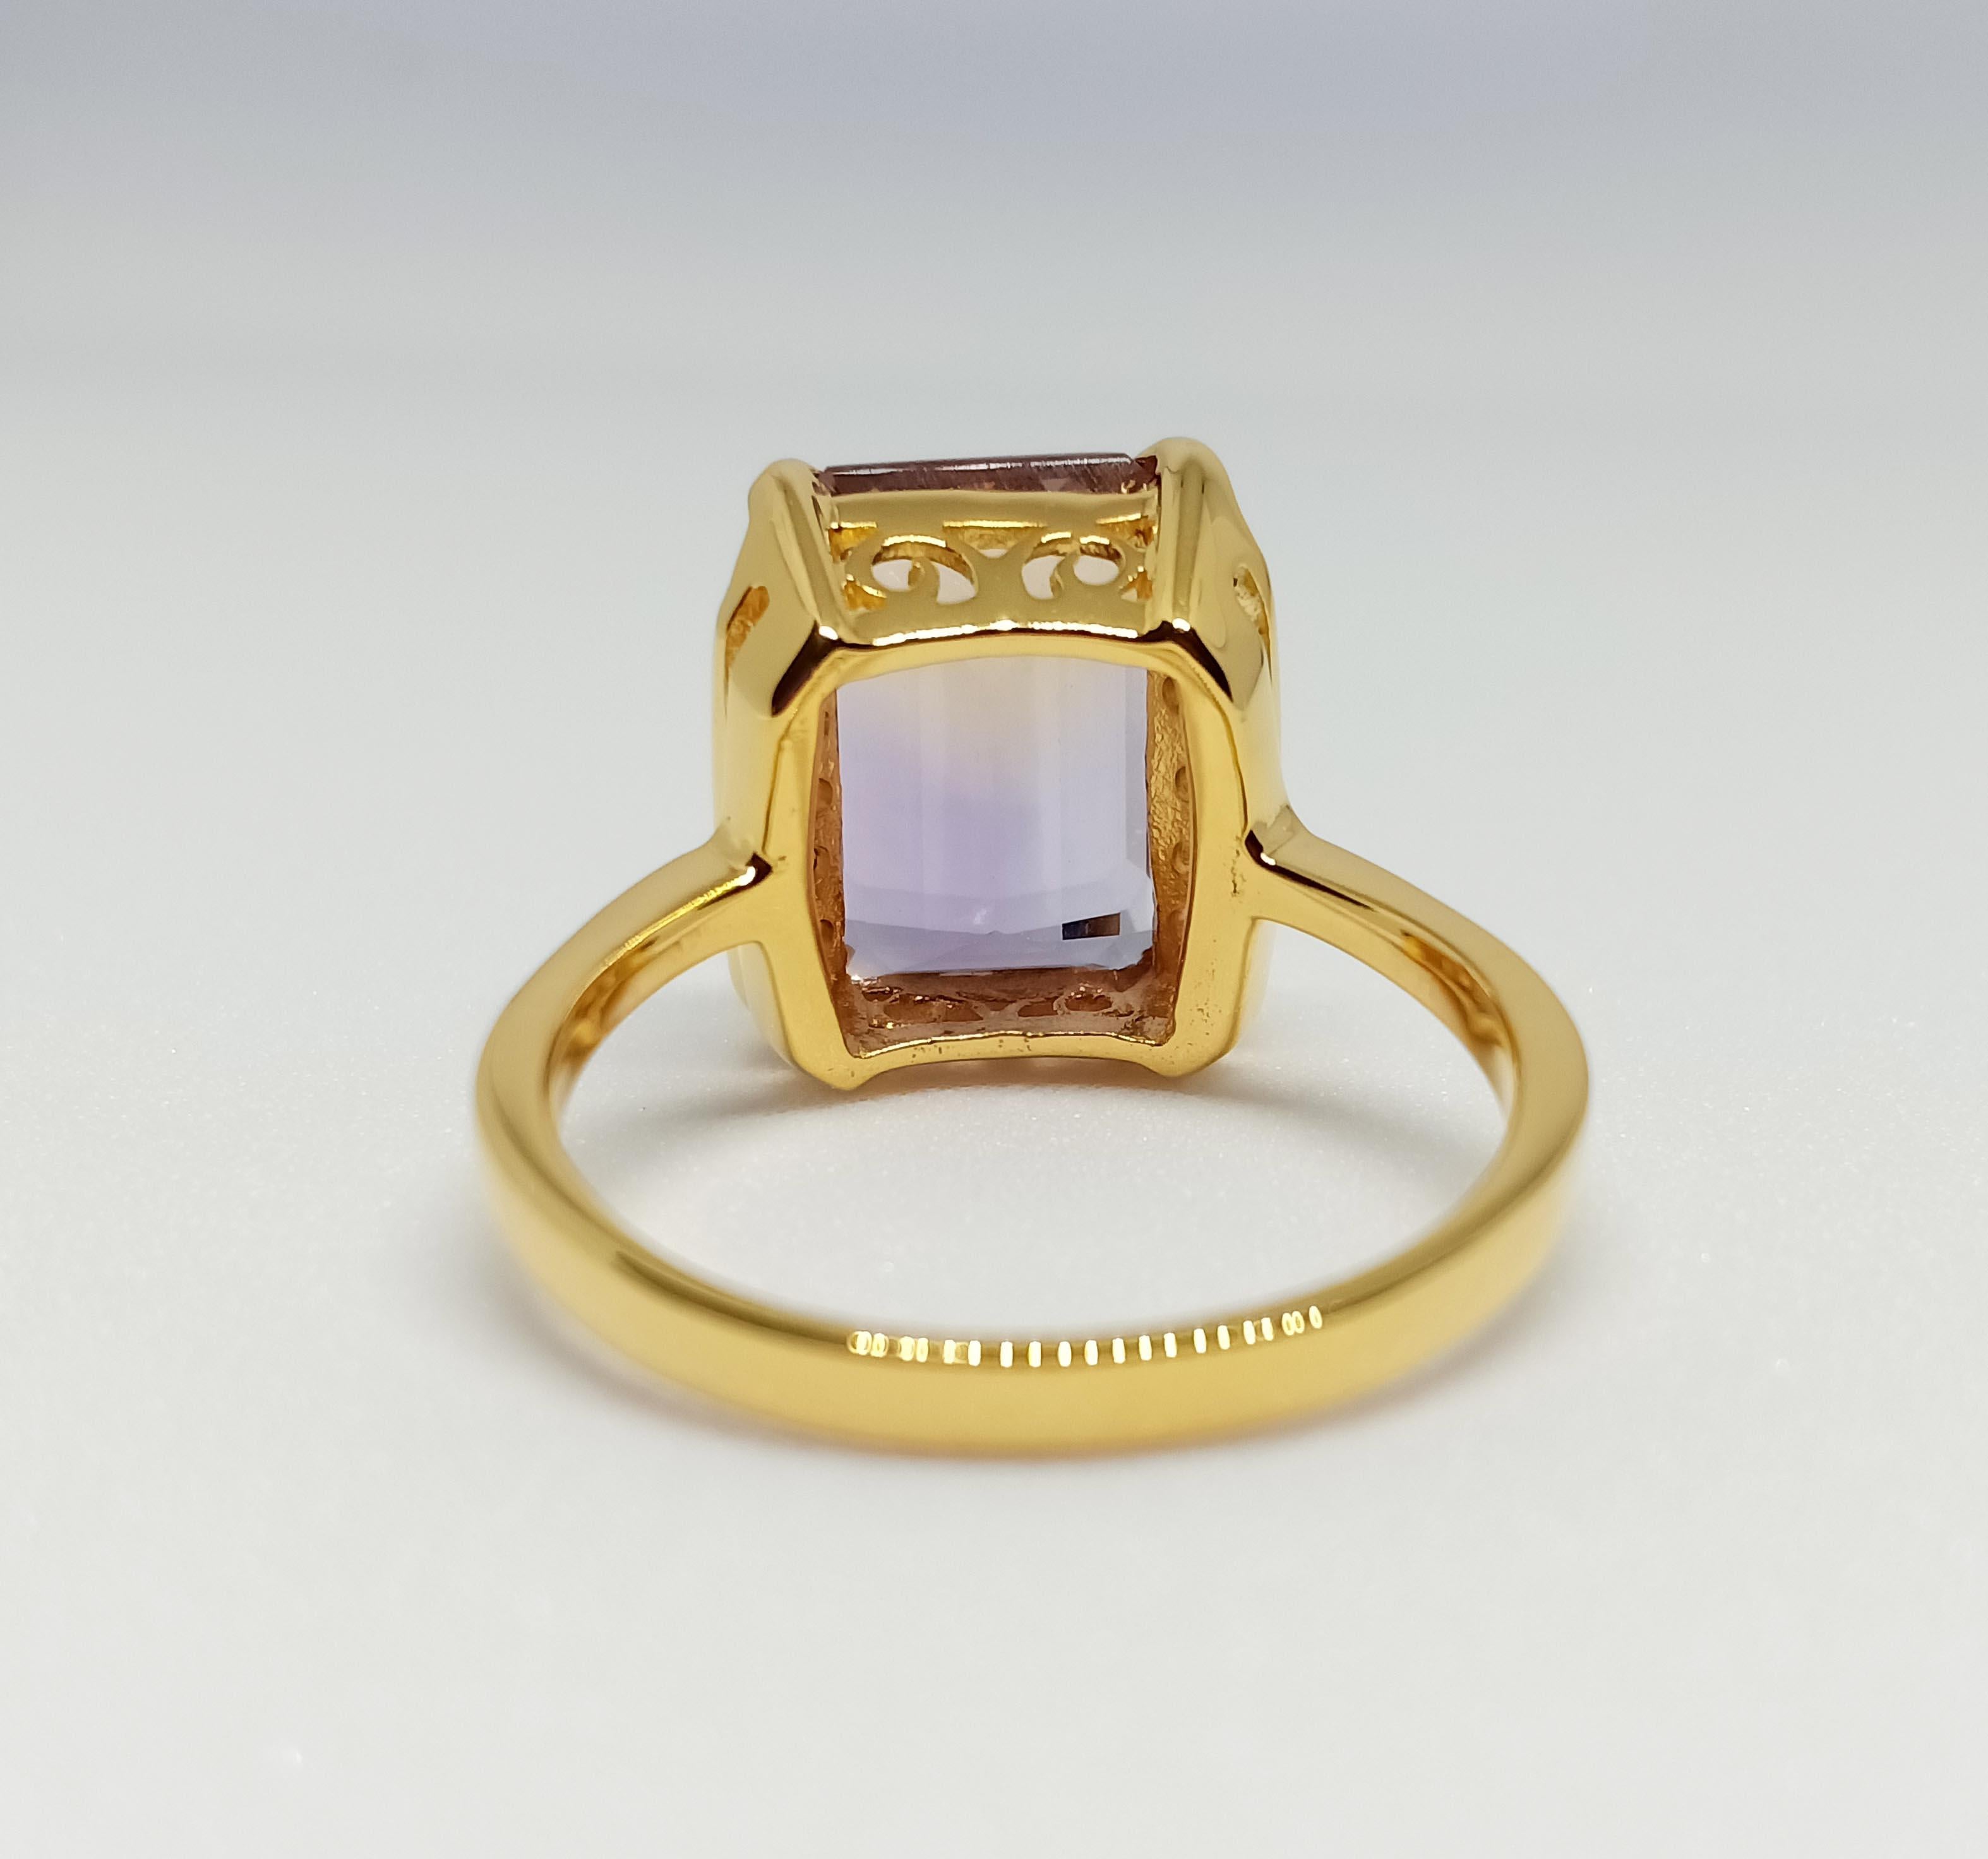 Emerald Cut 6.79ct Ametrine Ring 18K gold plated on over sterling silver For Sale